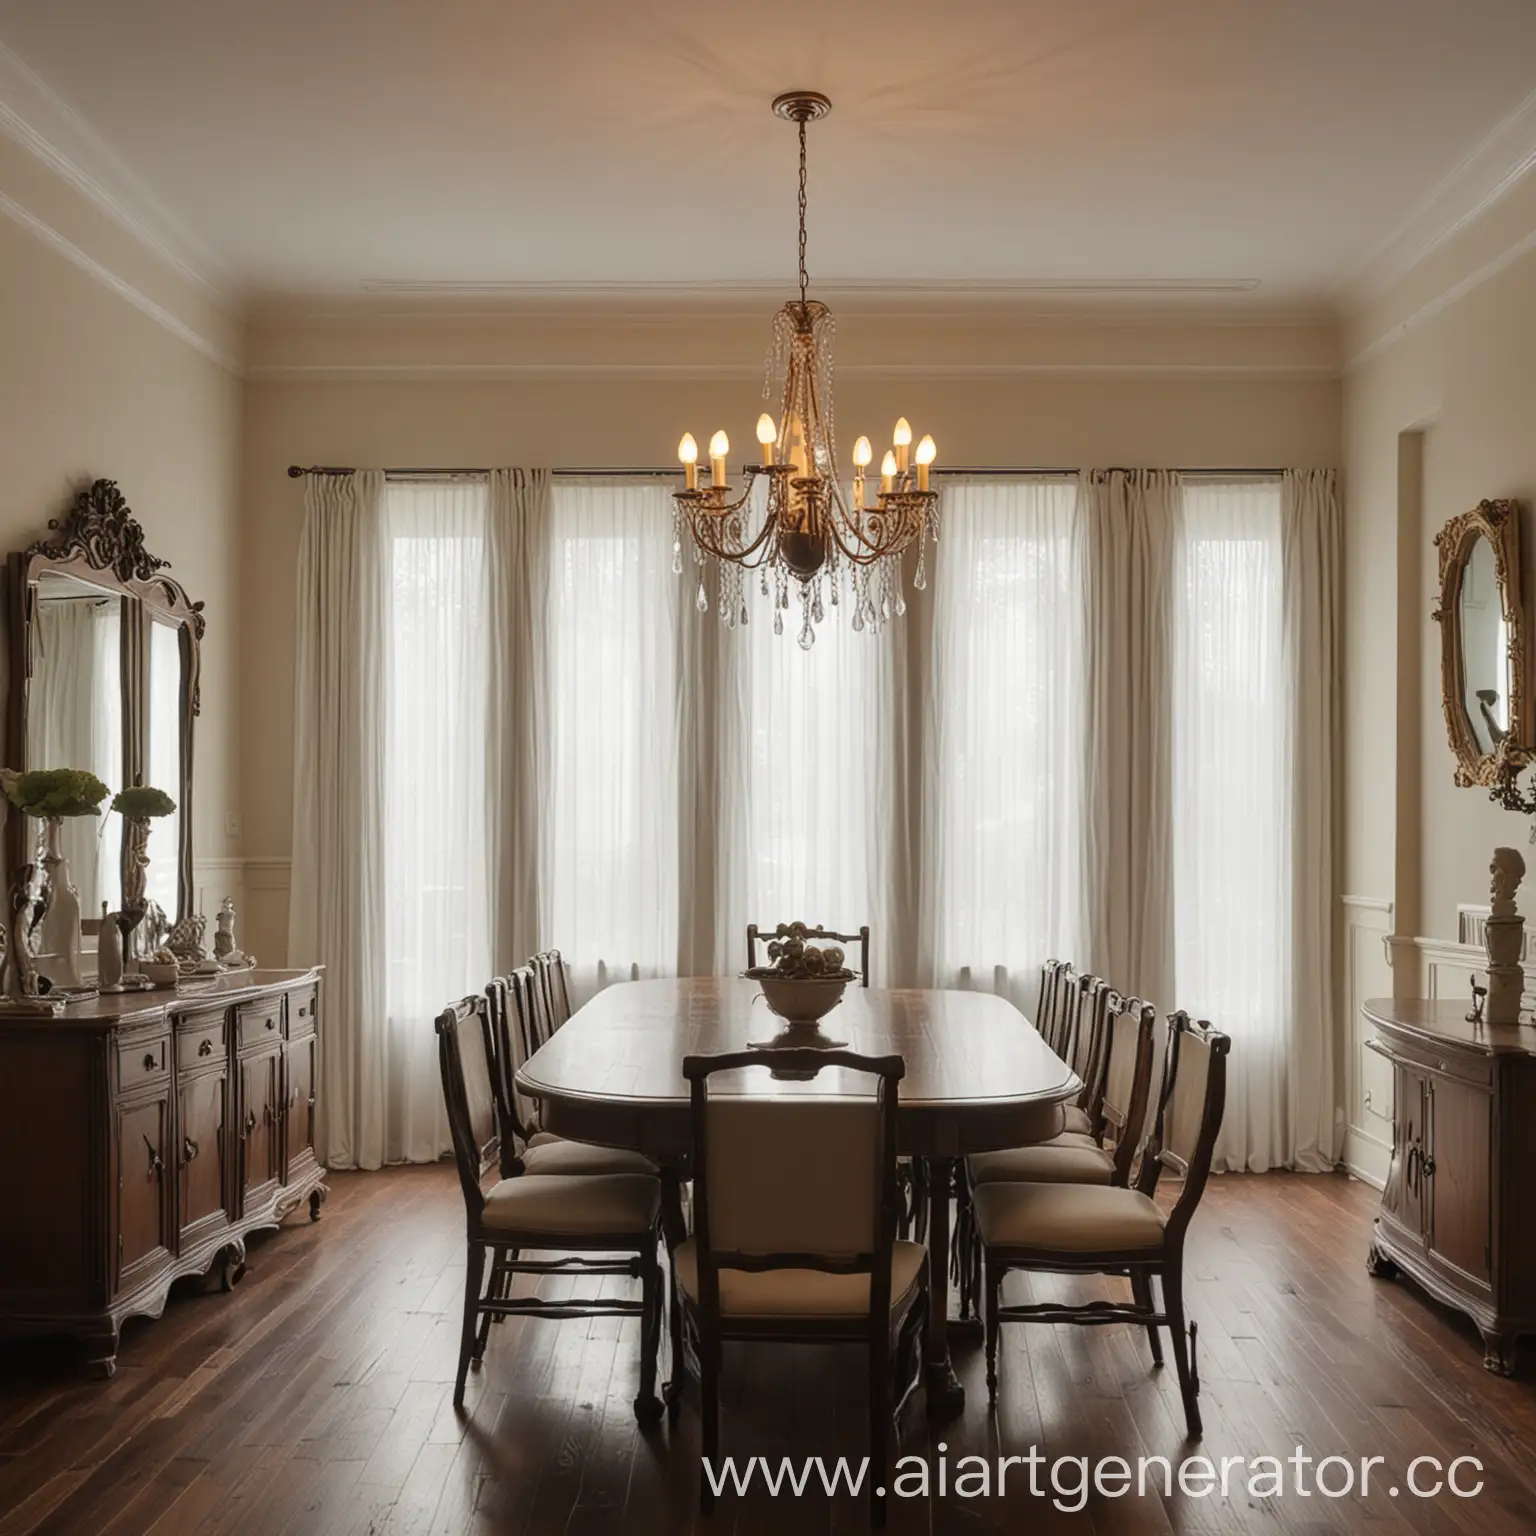 Elegant-Dining-Room-with-Classic-Wooden-Furniture-and-Soft-Lighting